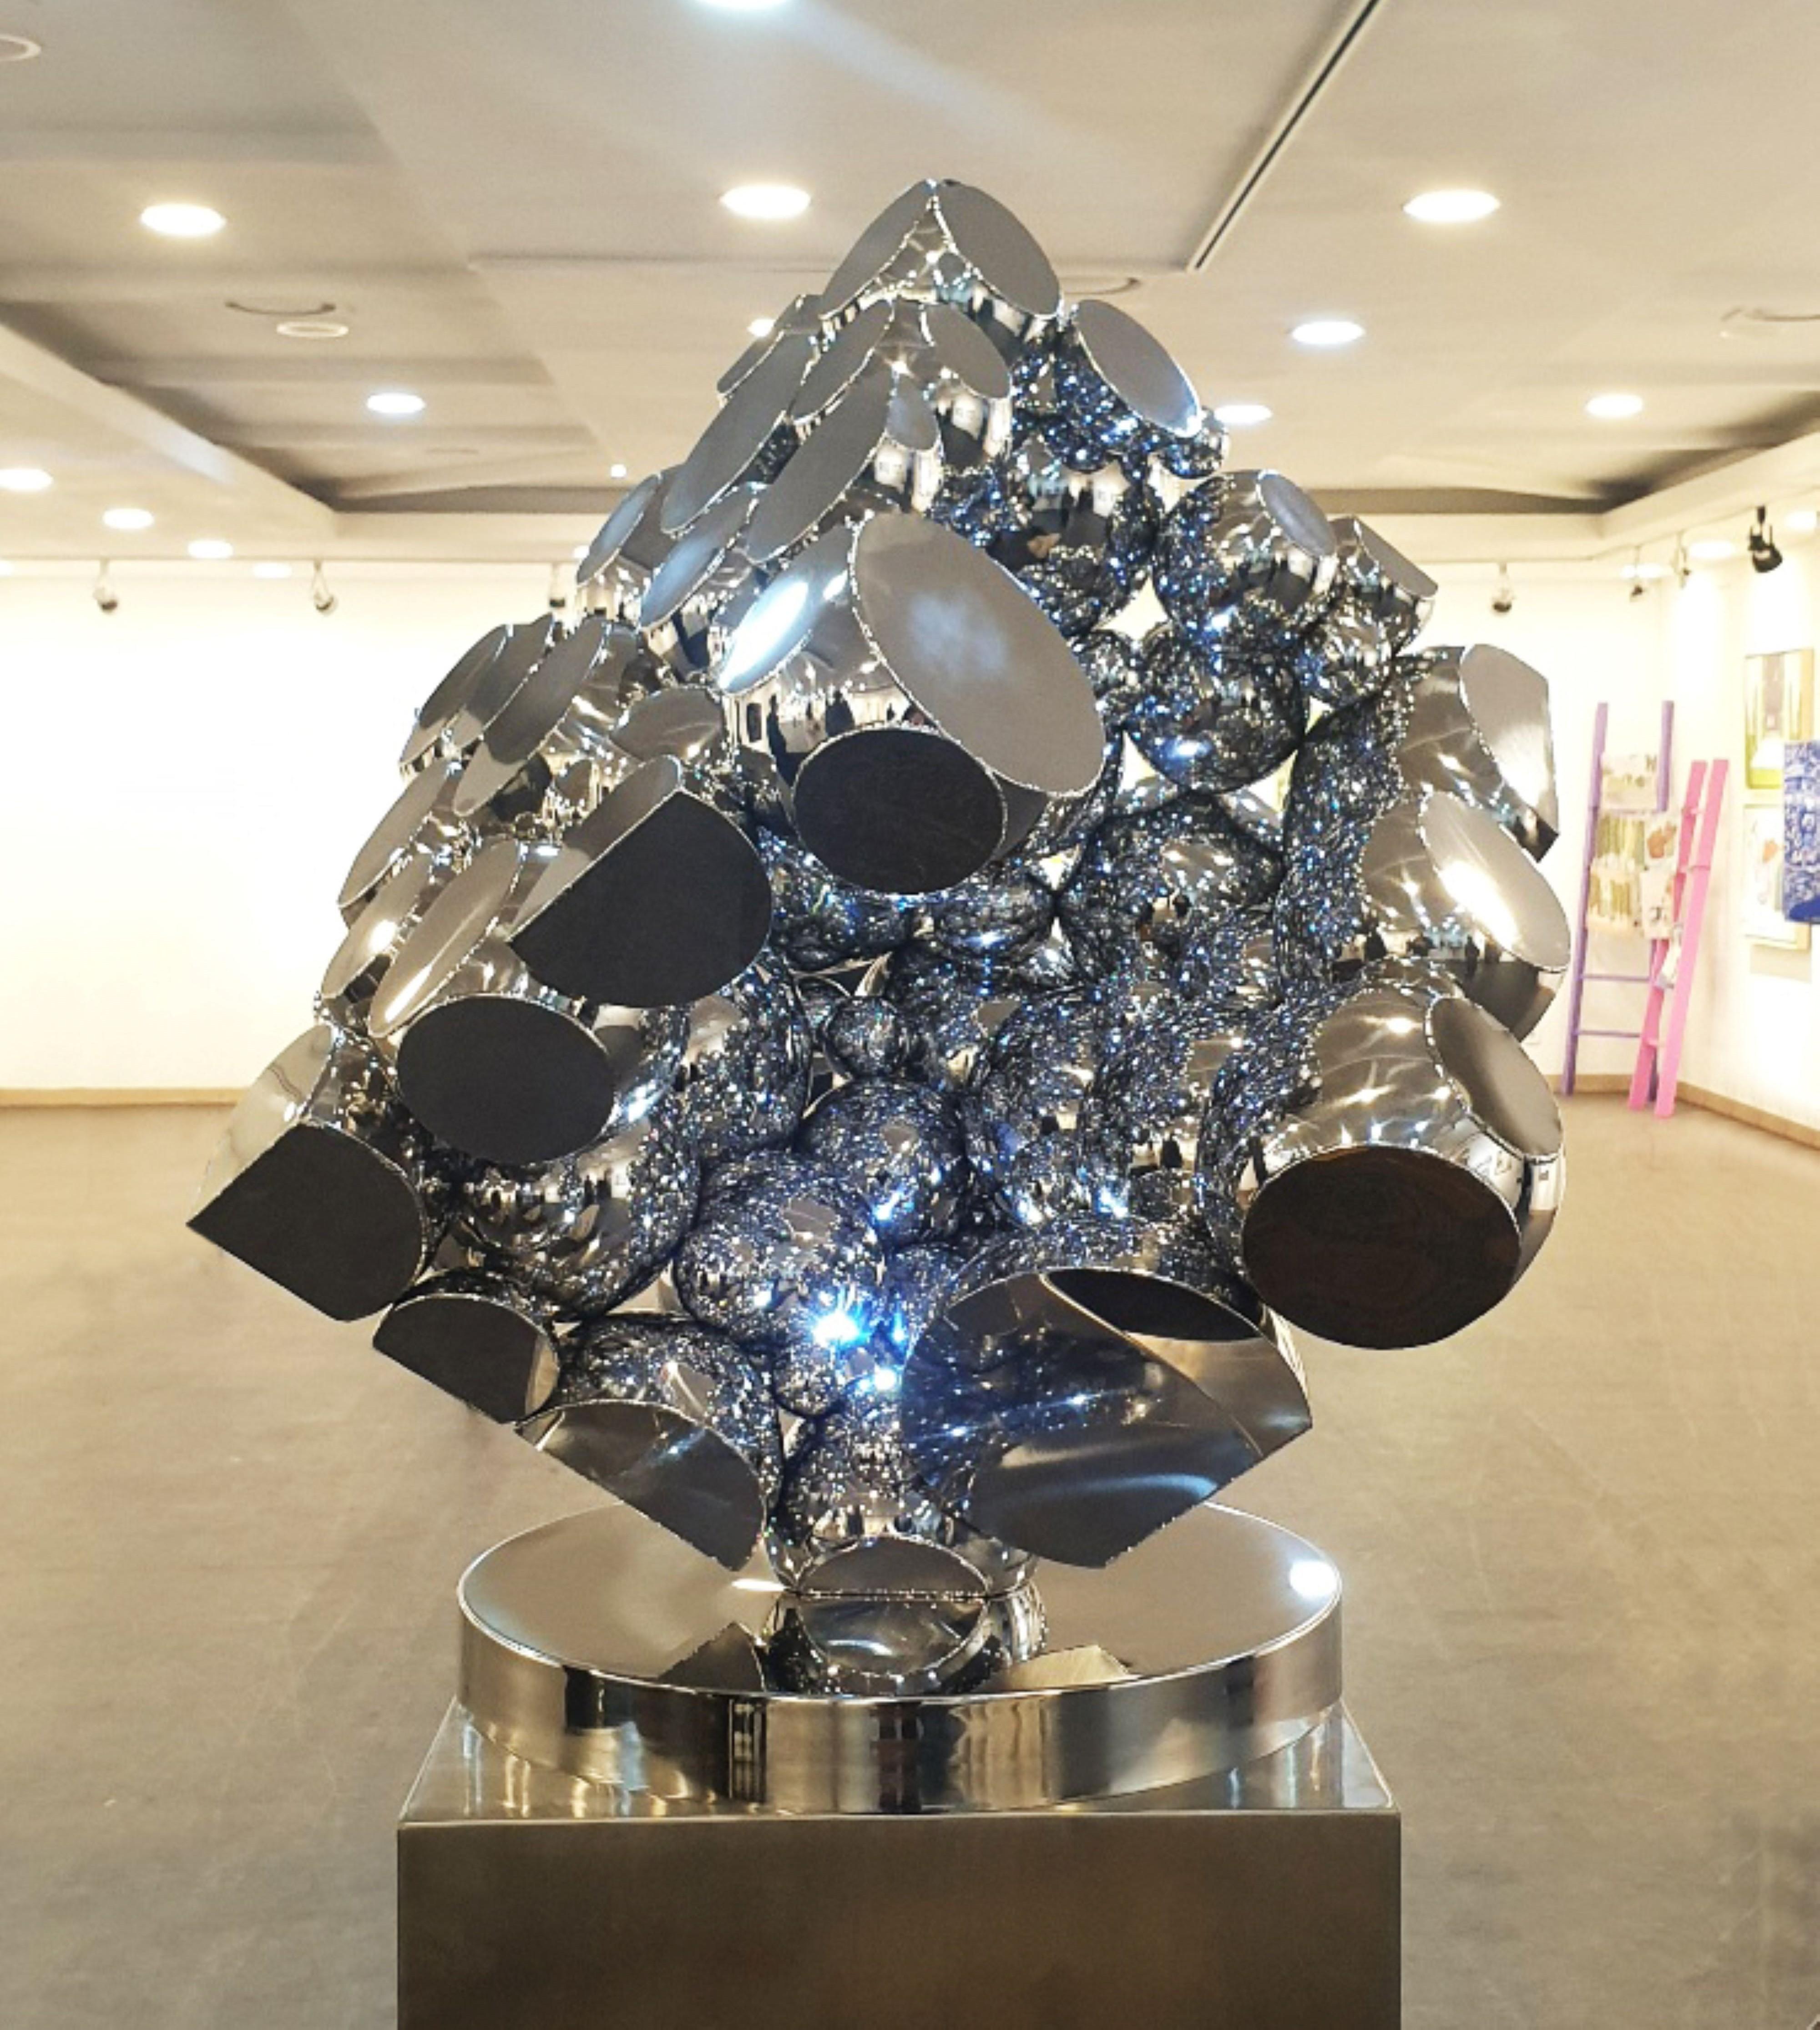 Infinity Cube - Sculpture by Lee Song Joon